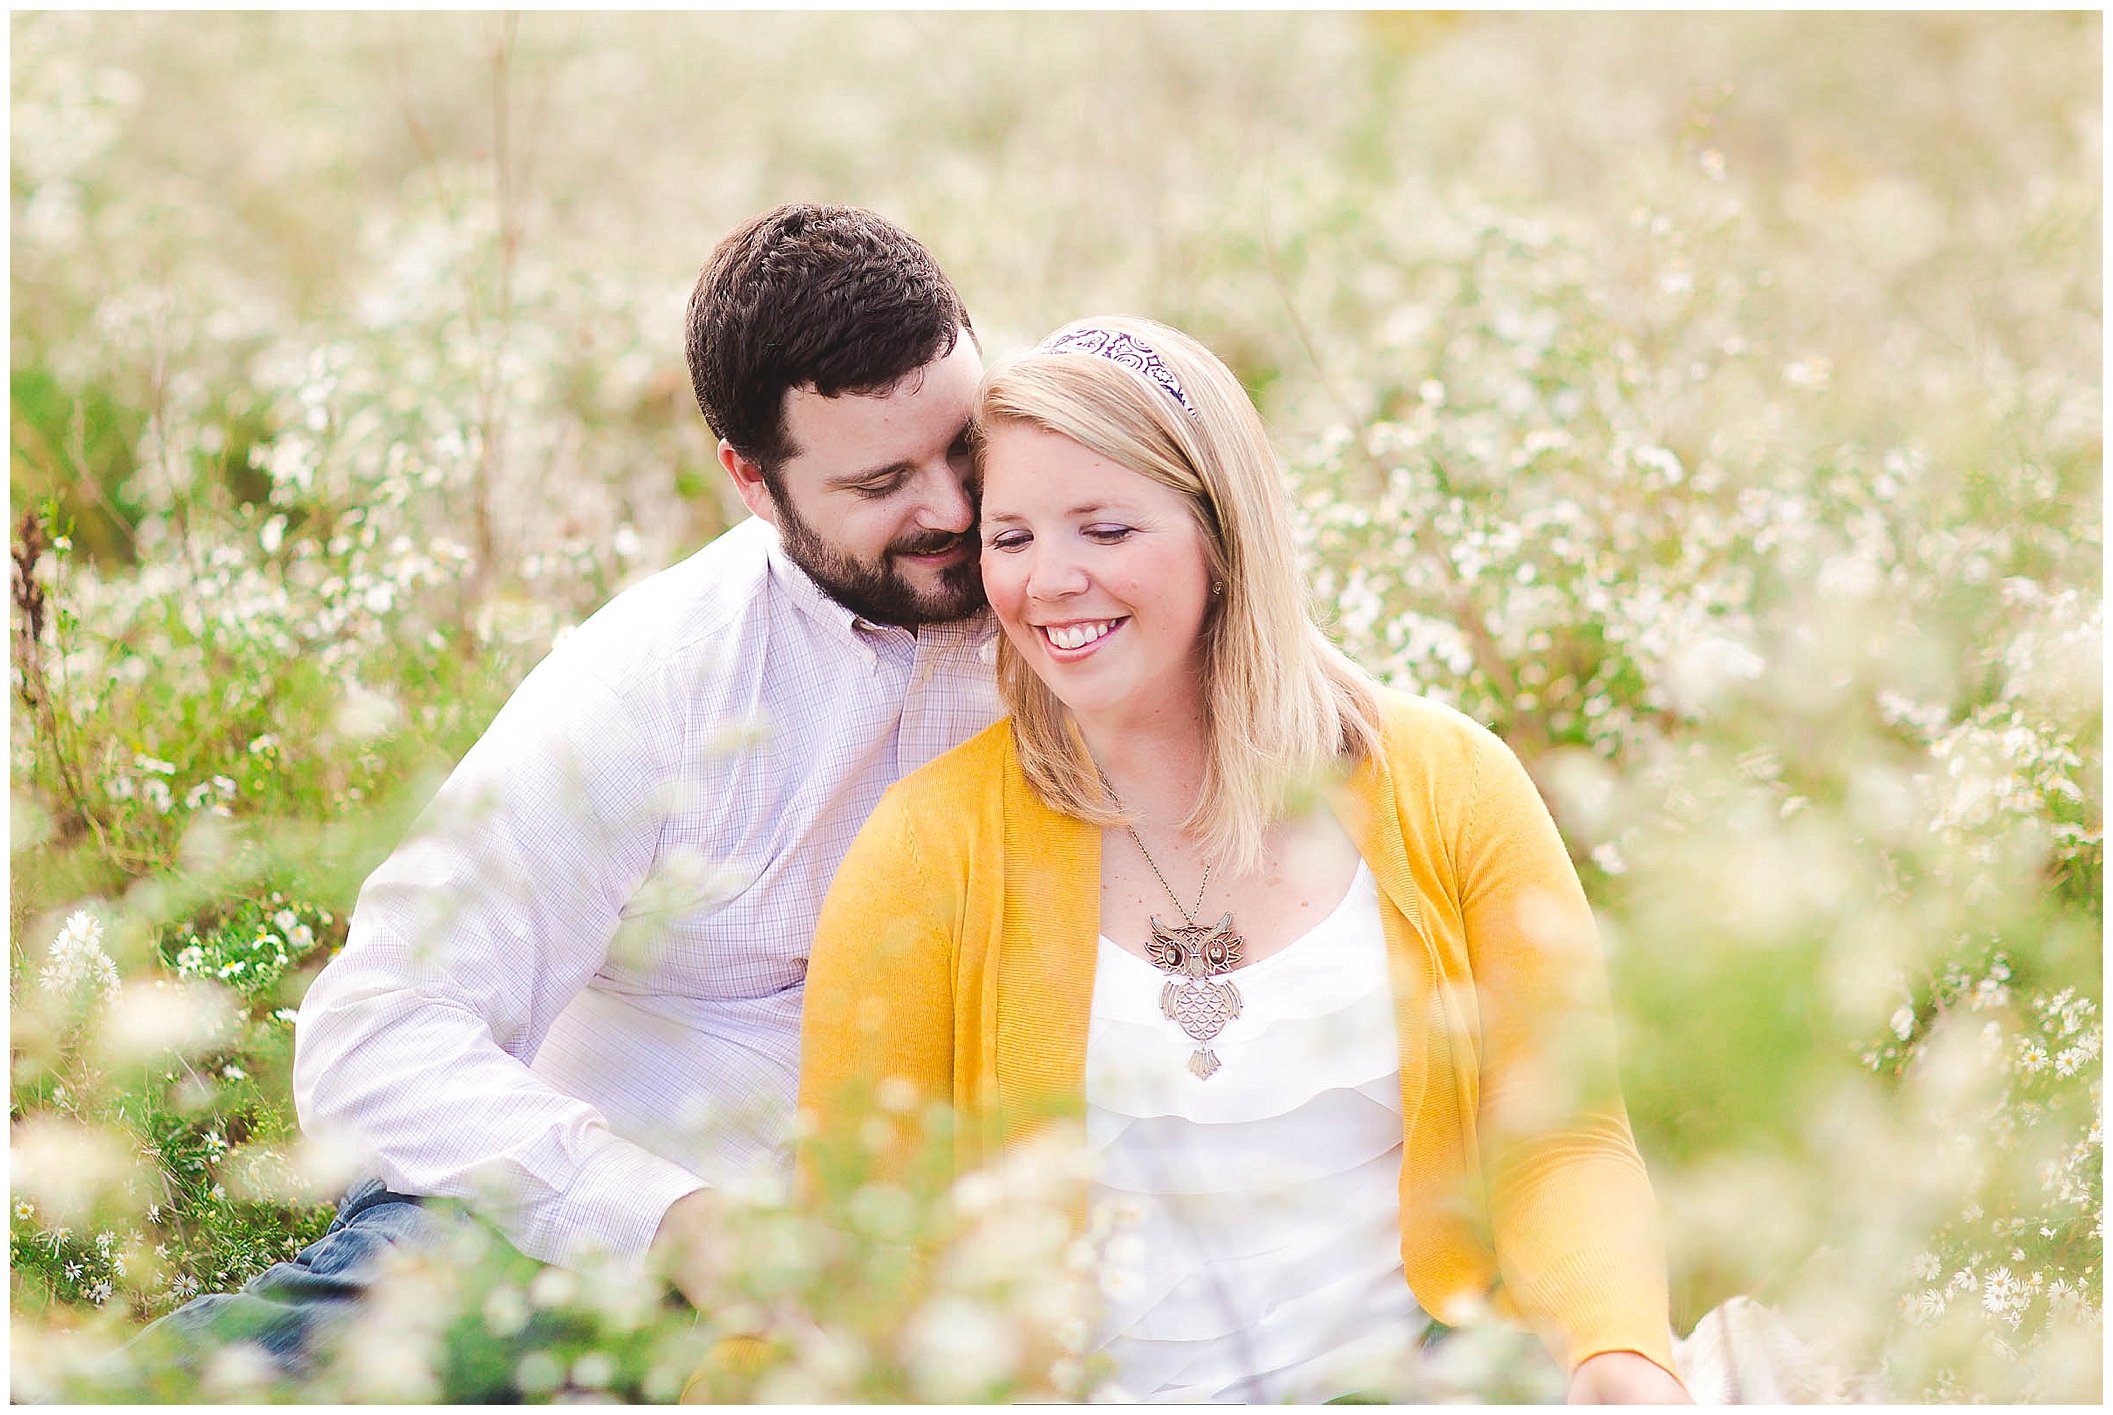 Sunshine filled engagement session in a field of wildflowers, Fort Wayne Indiana Wedding Photographer_0016.jpg